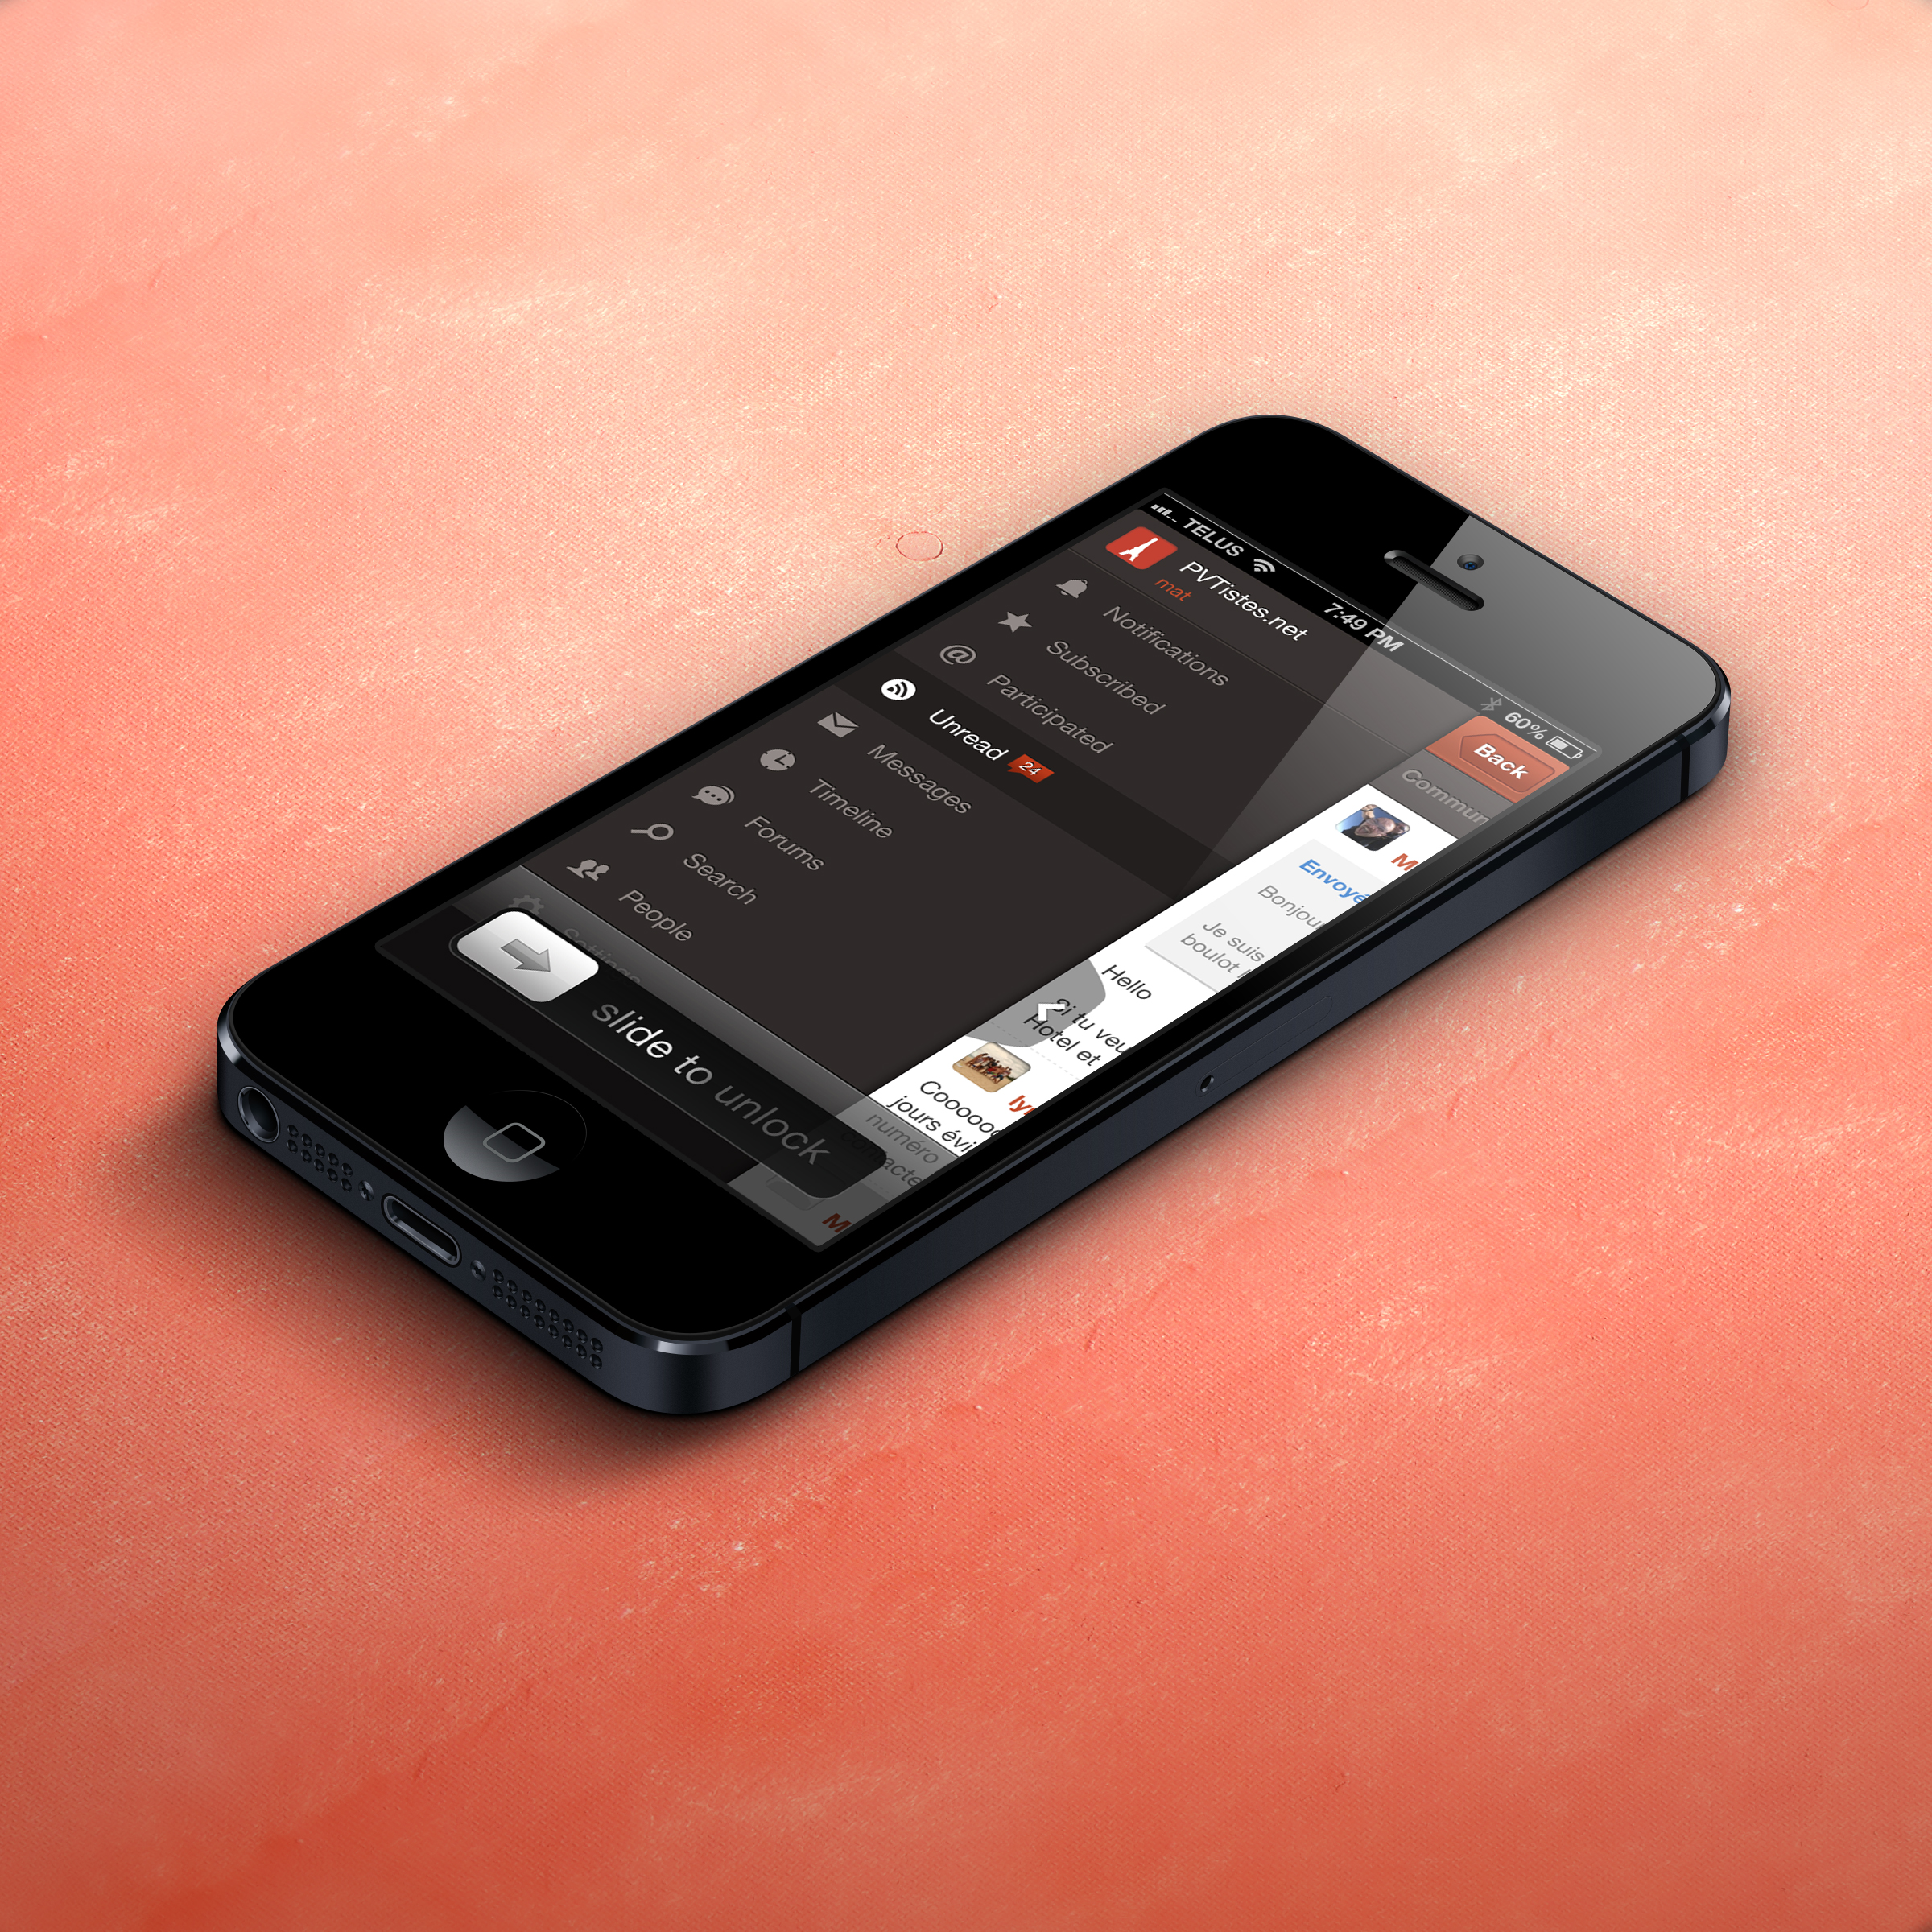 Nom : iPhone-5-3D-view-MockUp.jpg
Affichages : 1009
Taille : 4,59 Mo